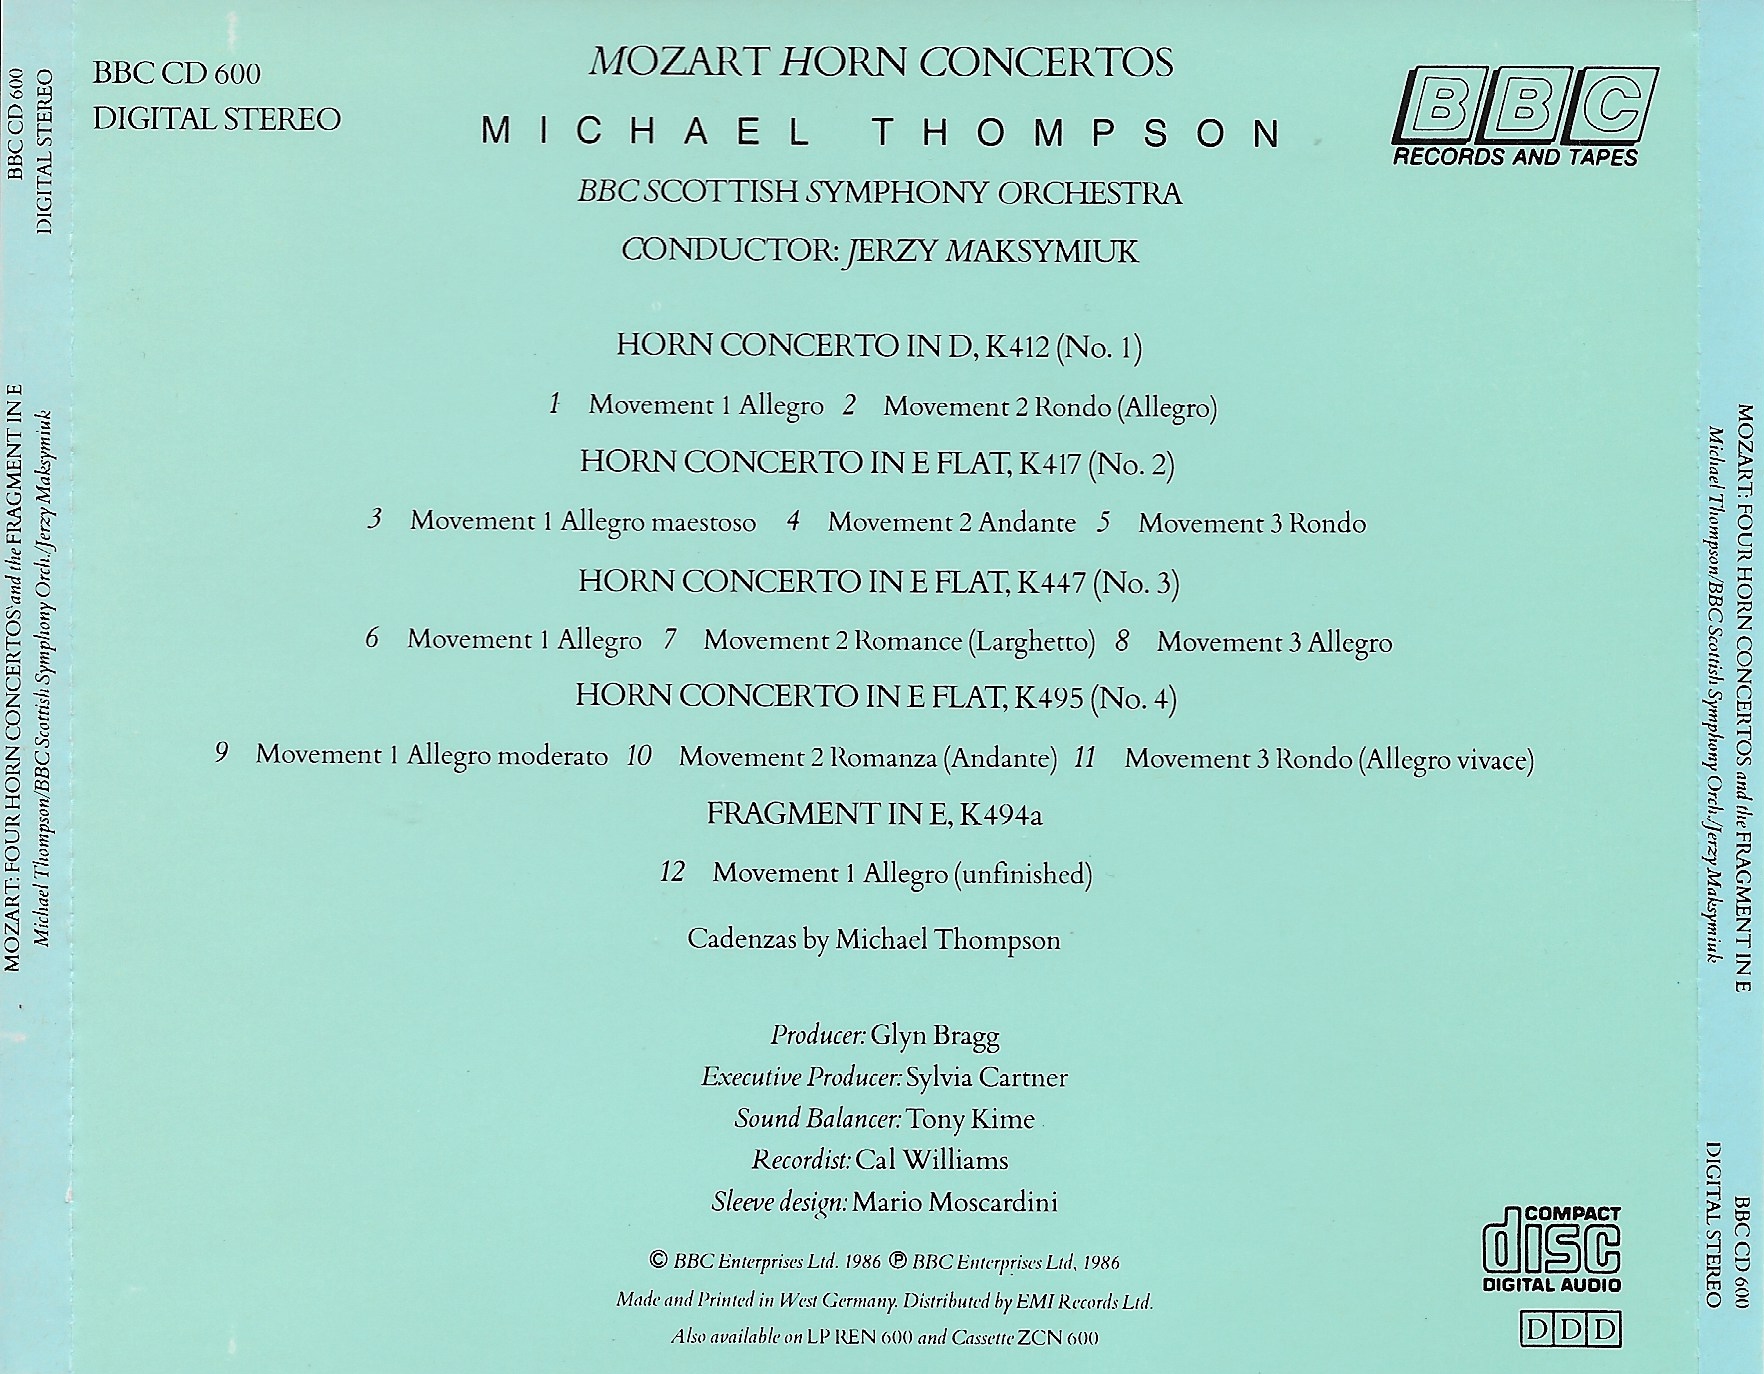 Picture of BBCCD600 Mozart - Four horn concertos and the fragment in E by artist Mozart from the BBC records and Tapes library